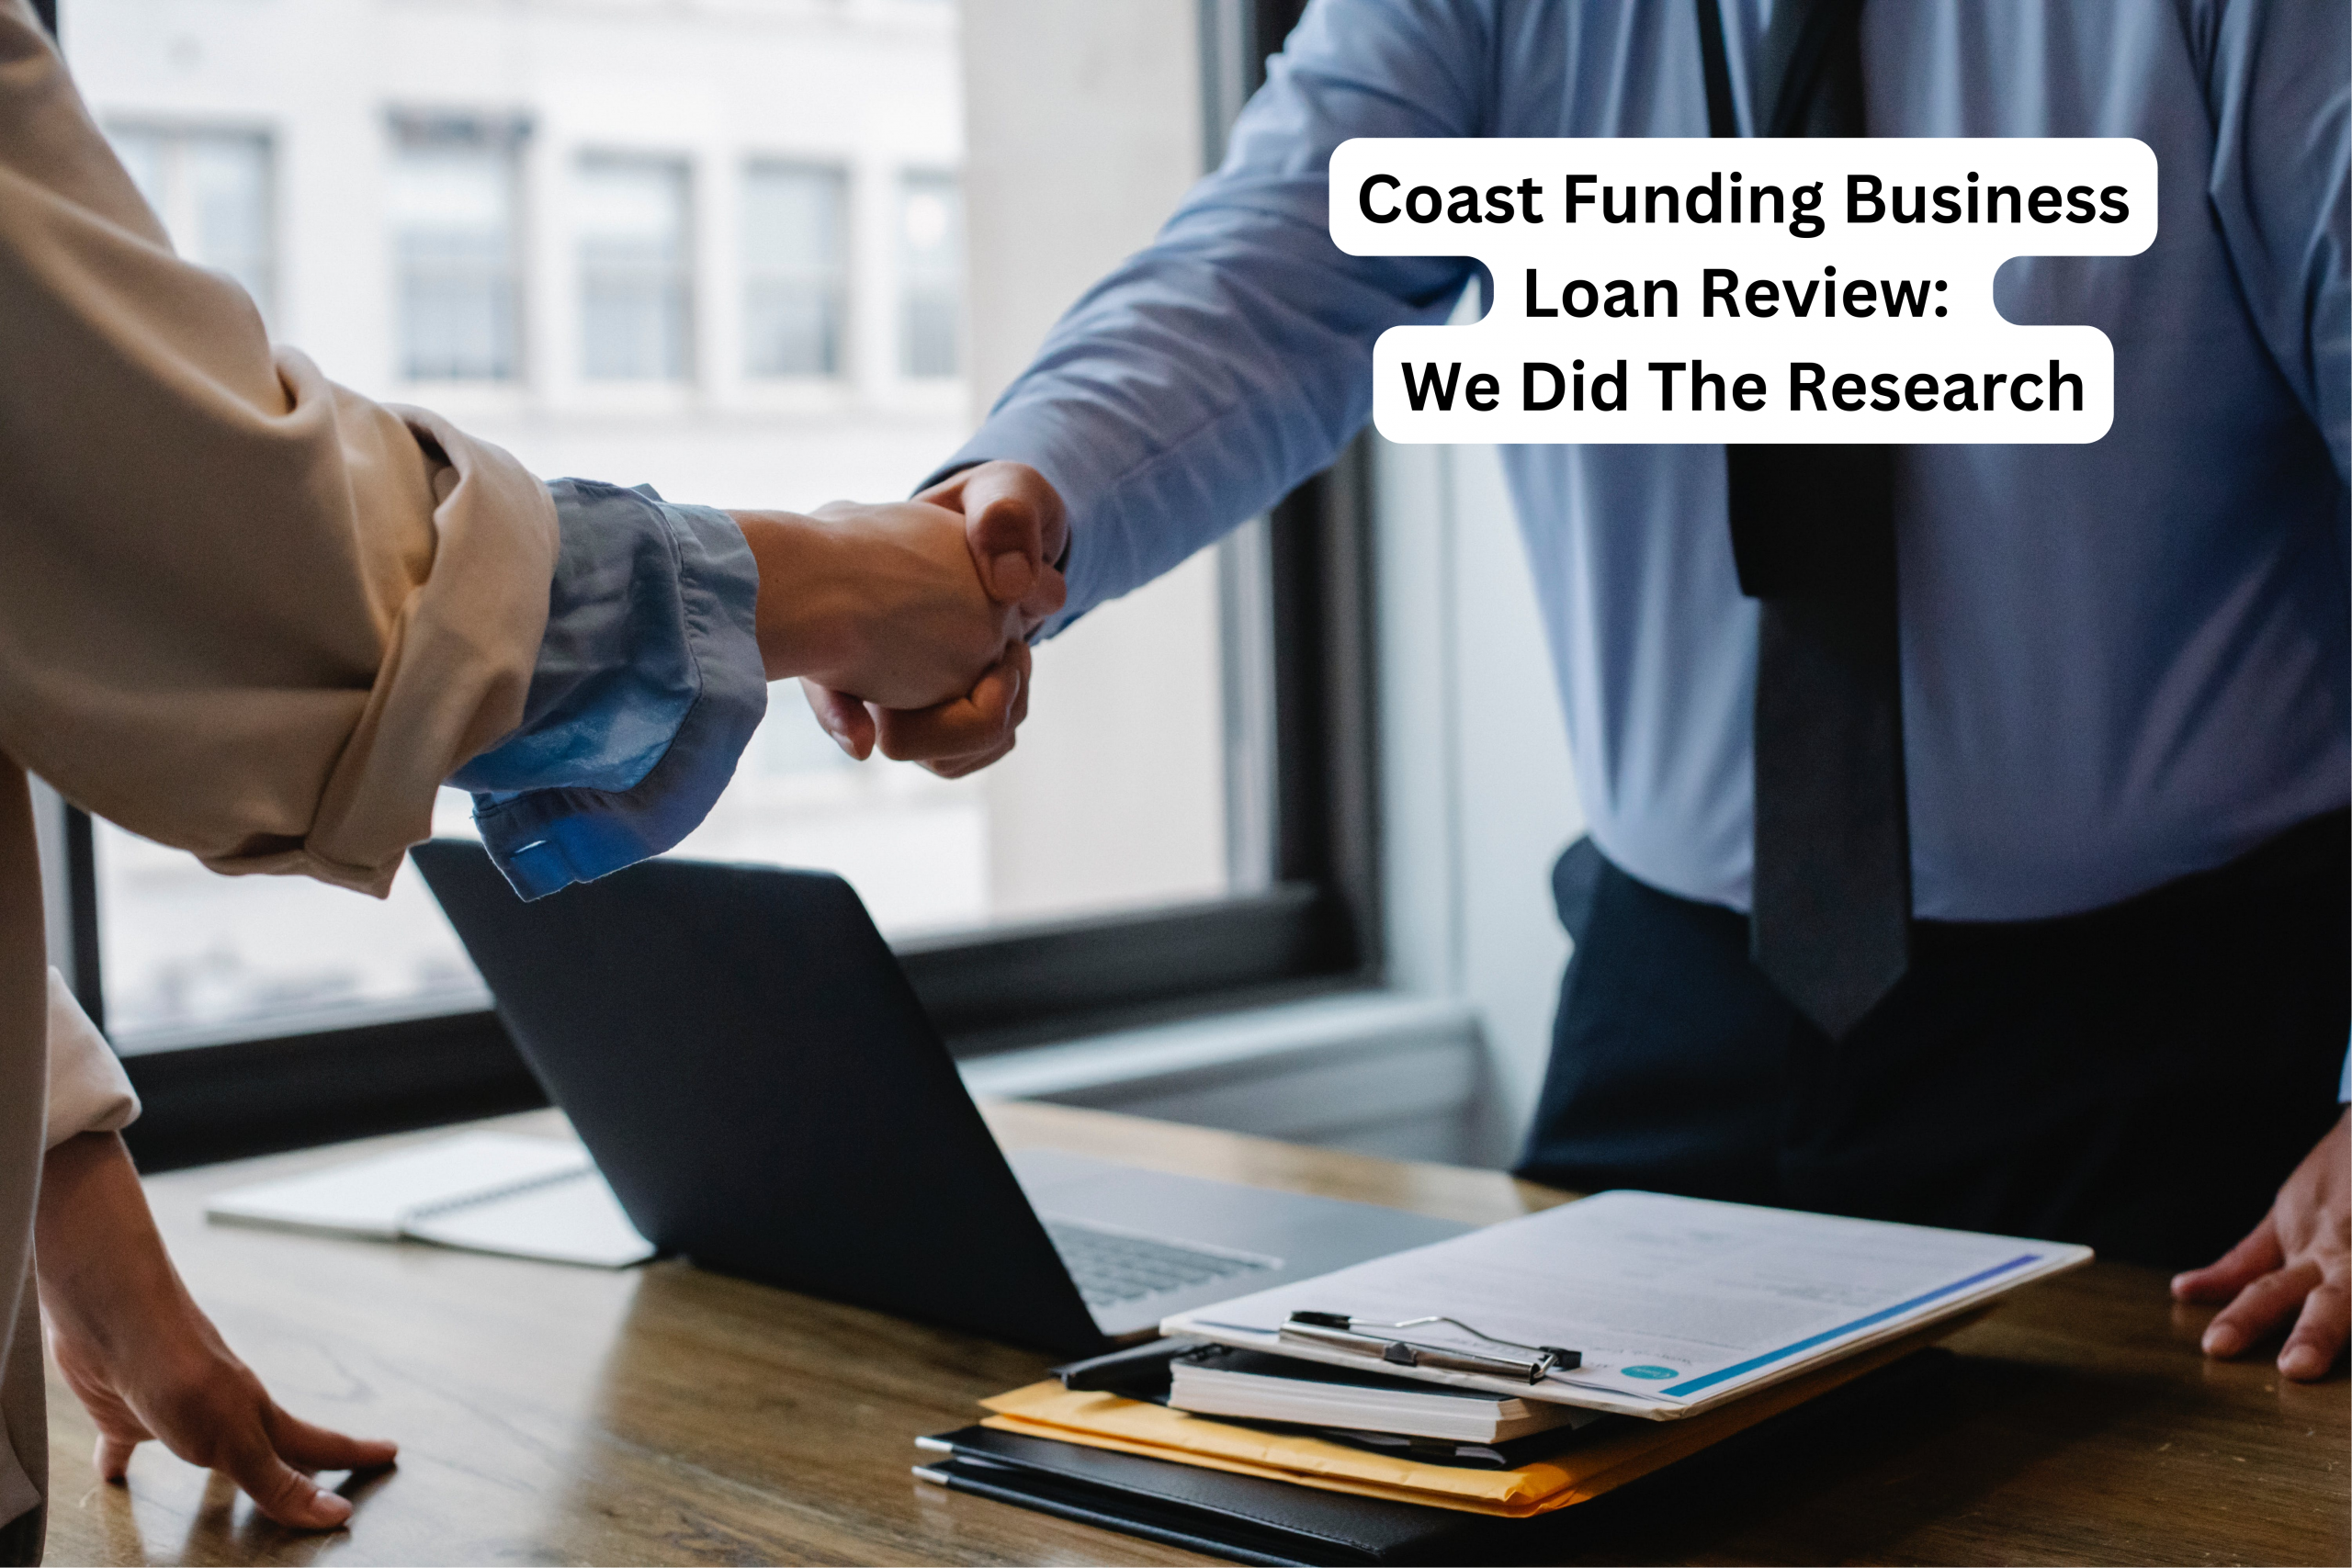 Coast Funding Business Loan Review: We Did The Research